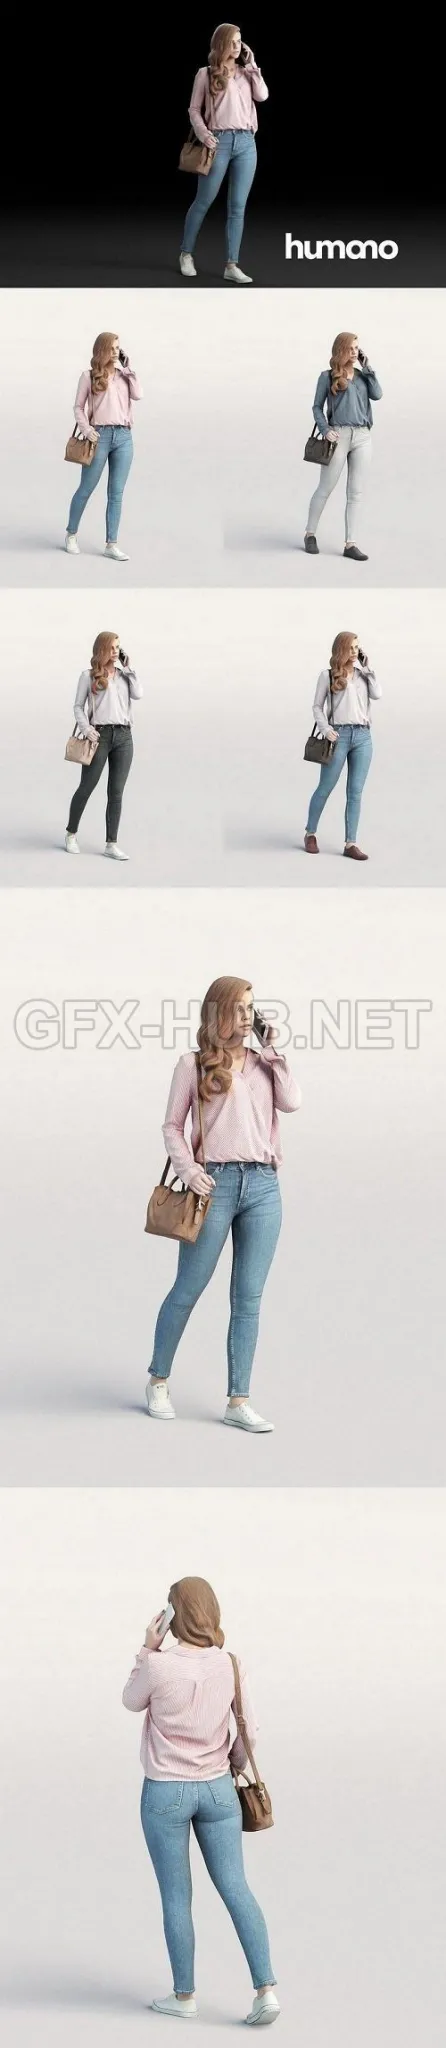 PBR Game 3D Model – Casual woman walking with a bag and phone